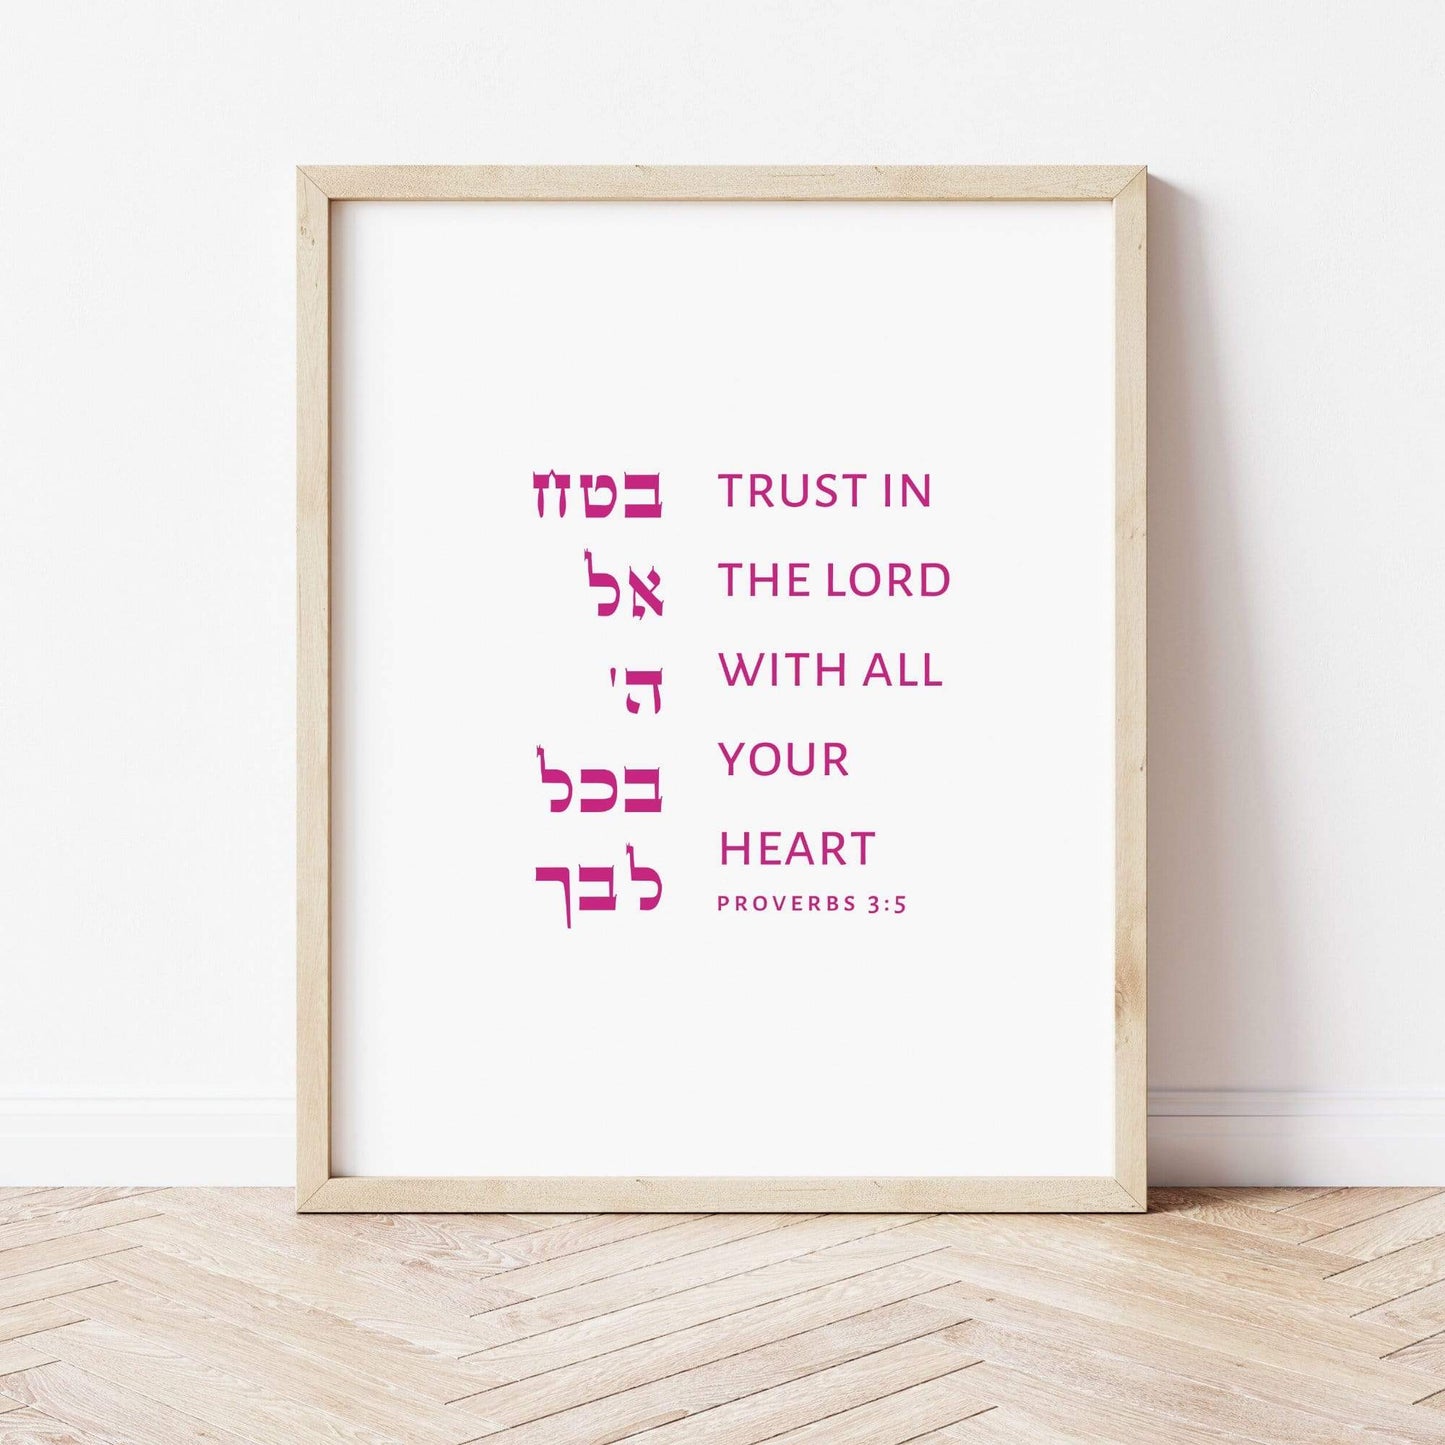 The Verse Proverbs 3:5 Proverbs 3:5 | Trust in the Lord with all Your Heart | Bat Mitzvah Gifts